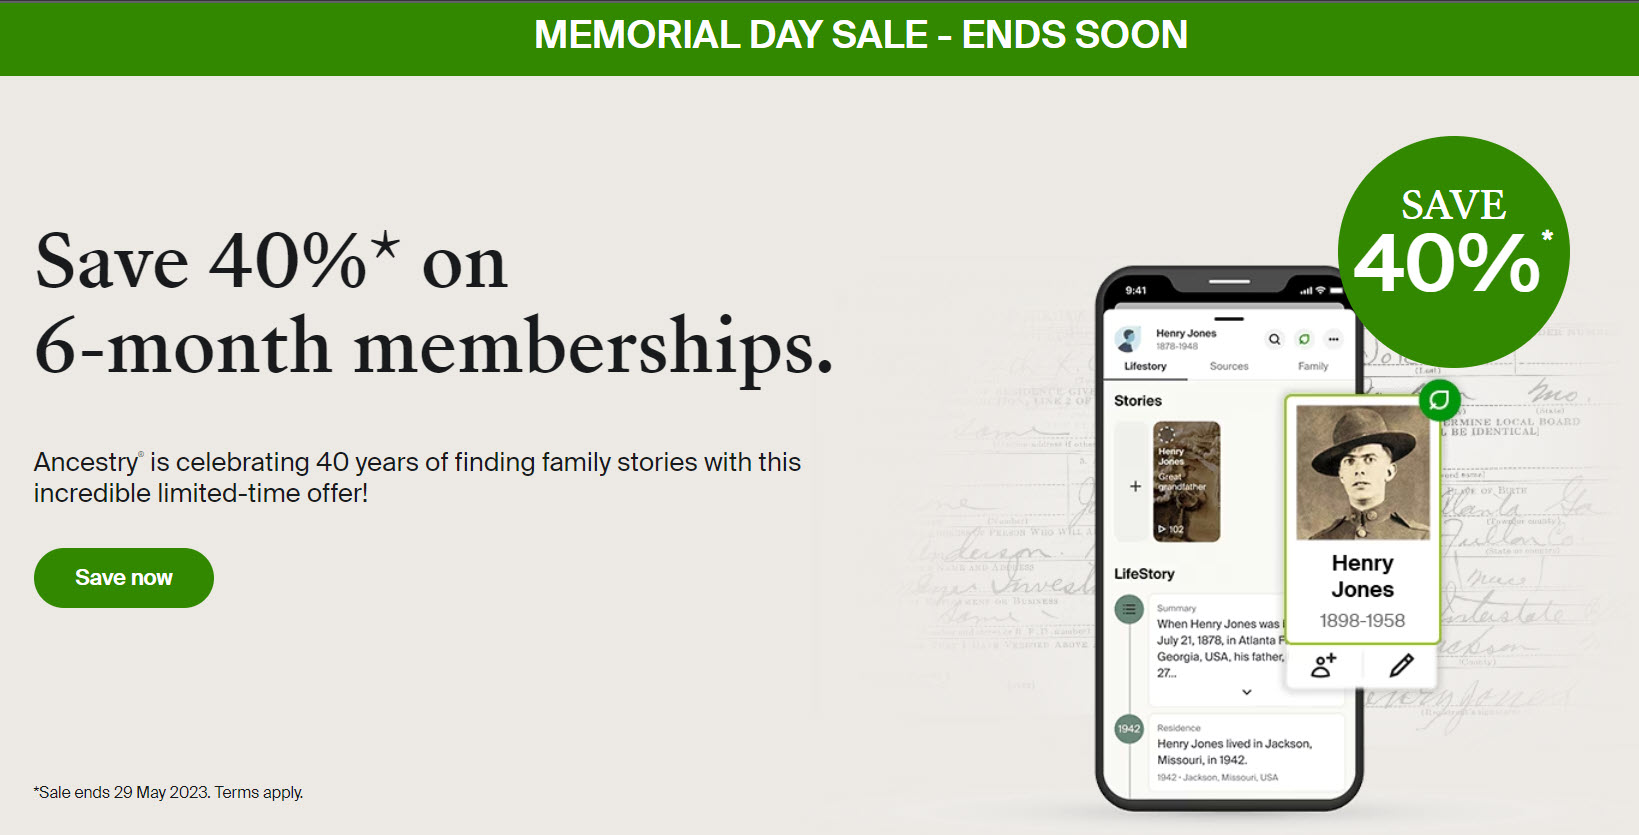 YAZZZZ! As I predicted yesterday, Ancestry is offering 40% off 6-month memberships as part of the Ancestry Memorial Day Sale